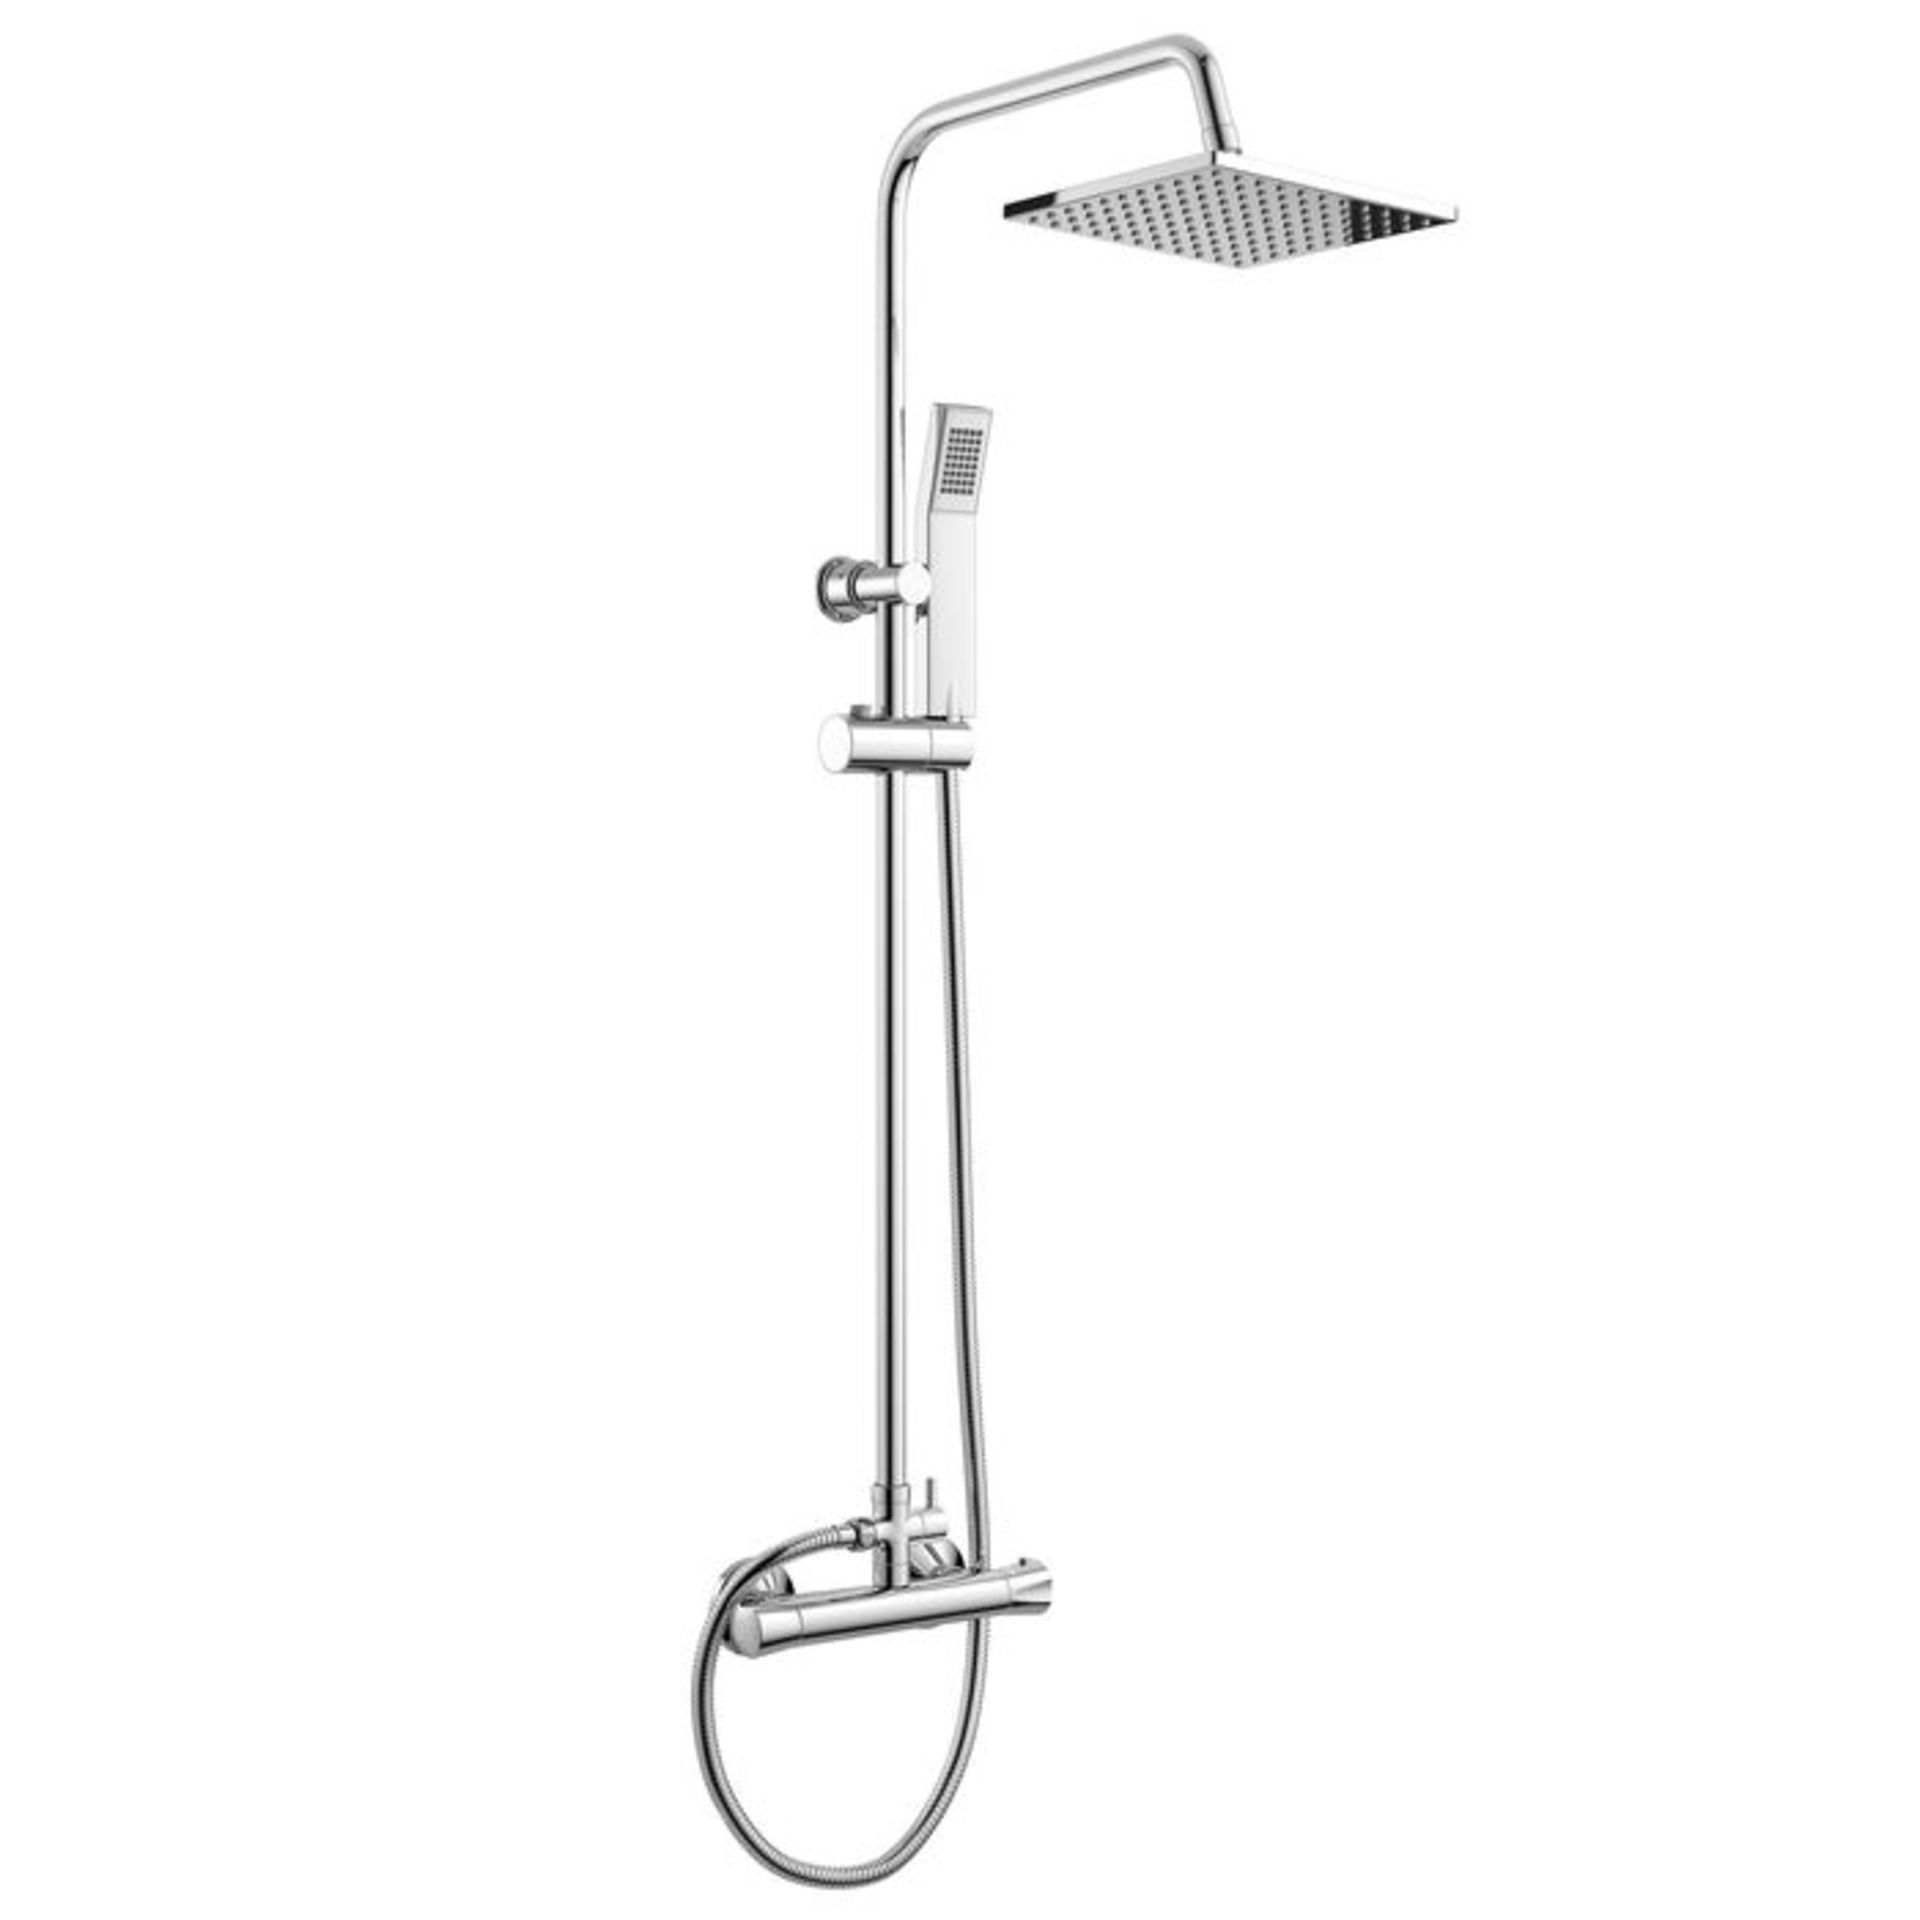 (L214) 200mm Square Head Thermostatic Exposed Shower Kit & Hand Held. We love this because it